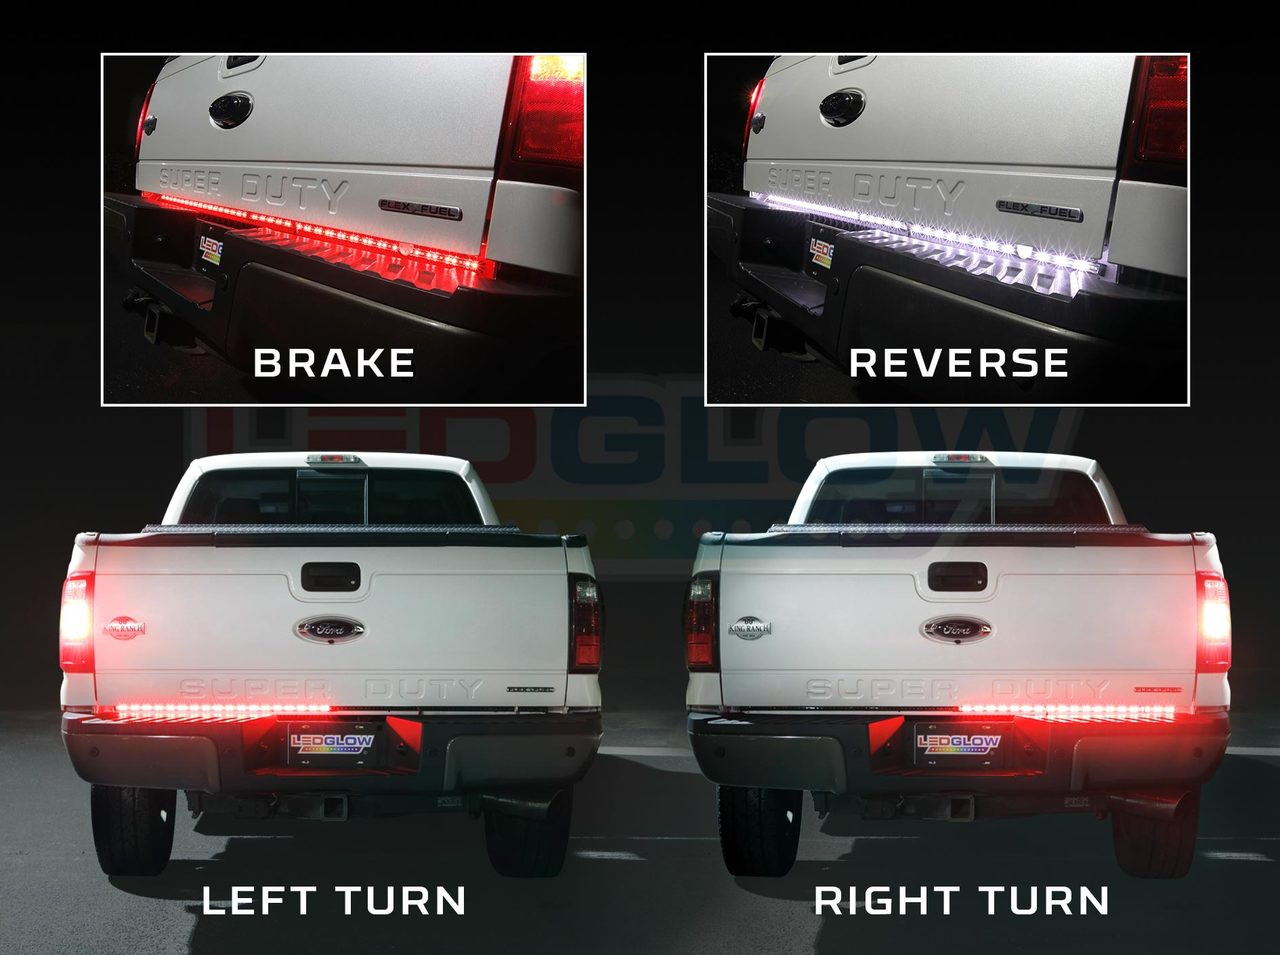 LEDGlow  2pc 60” Full-Size Truck Tailgate Light Bar with White Reverse  Lights